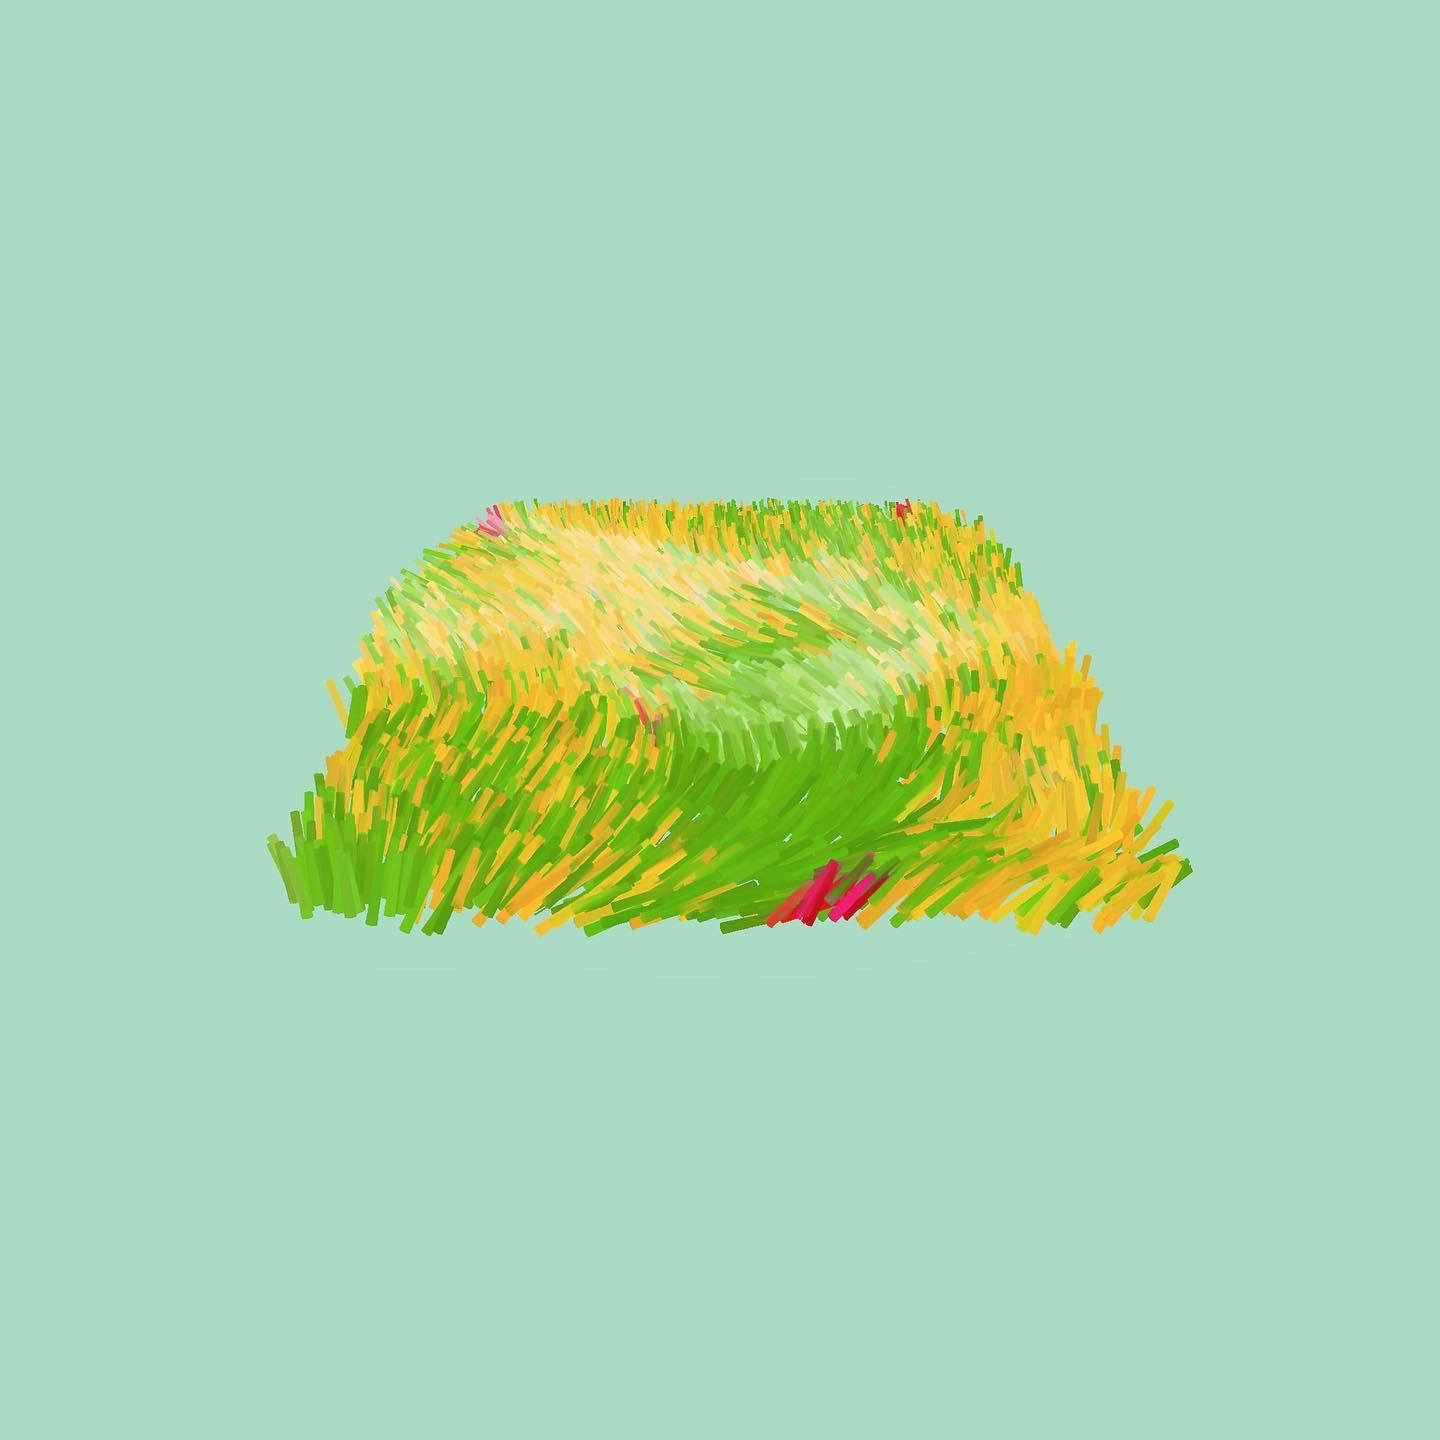 abstracted grassy field